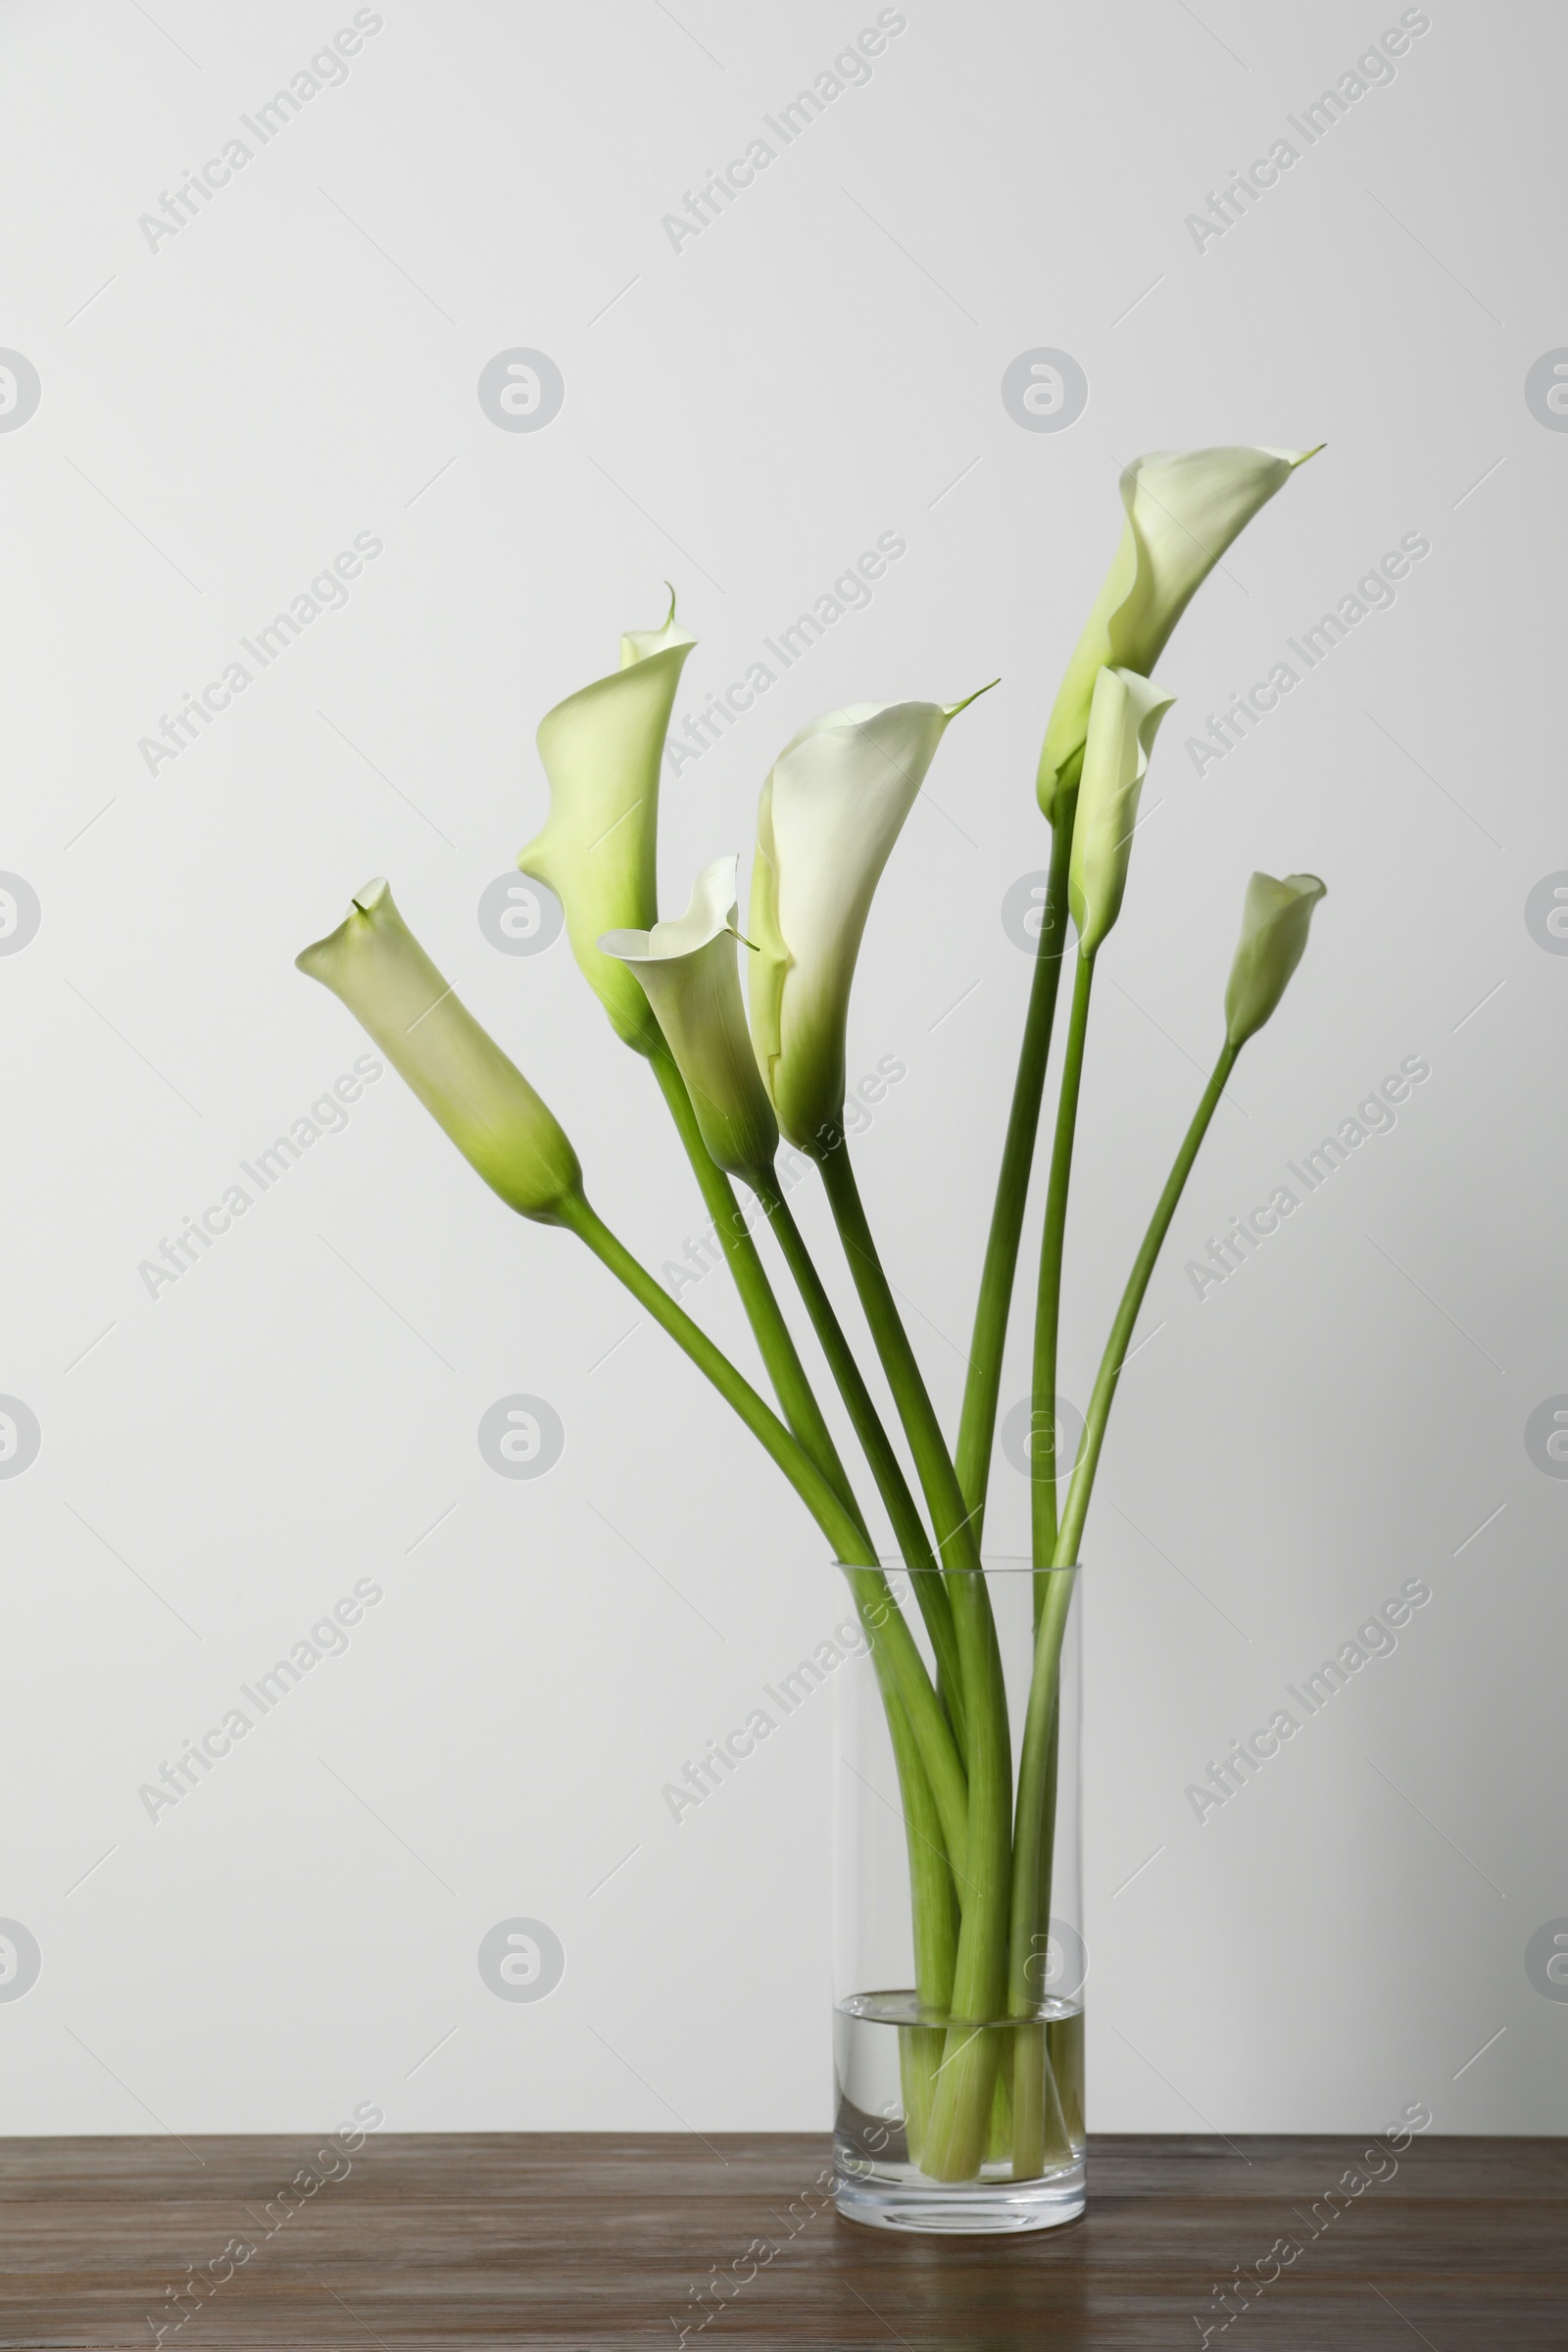 Photo of Beautiful calla lily flowers in vase on wooden table against white background